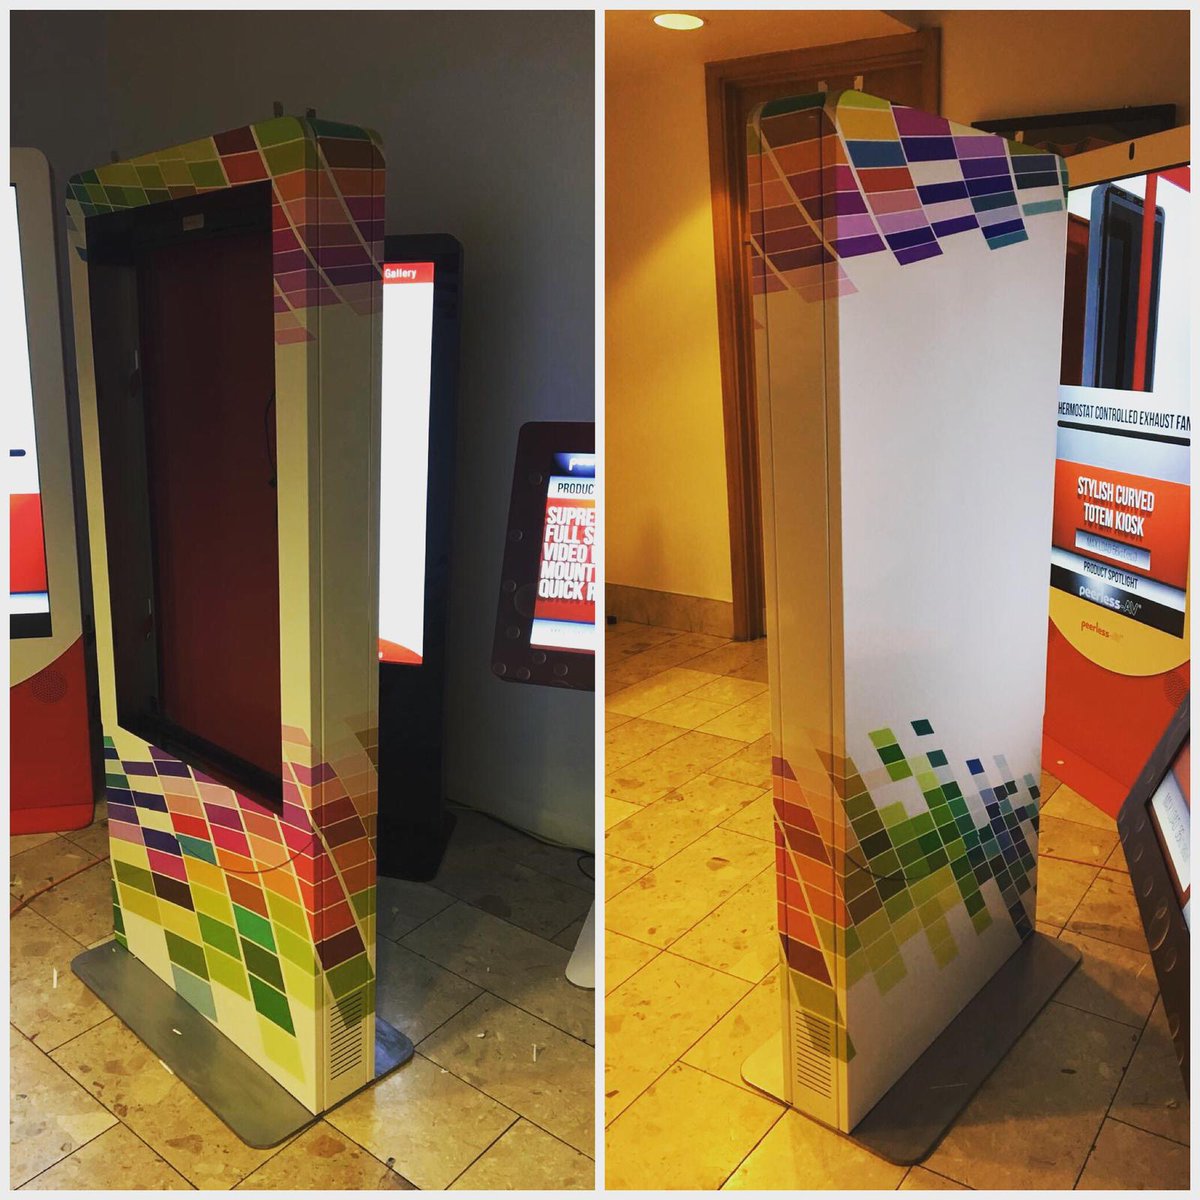 Vehicles aren’t the only things one can wrap. #kiosk #wrap #totaltransformation from plain to #wow 💫 #infokiosk #colourtransformation #imotion #installation #advertising #multicolour #city #london #excelcentre #olympiaexhibitioncentre #advertiseyourbrand #pumpyourown